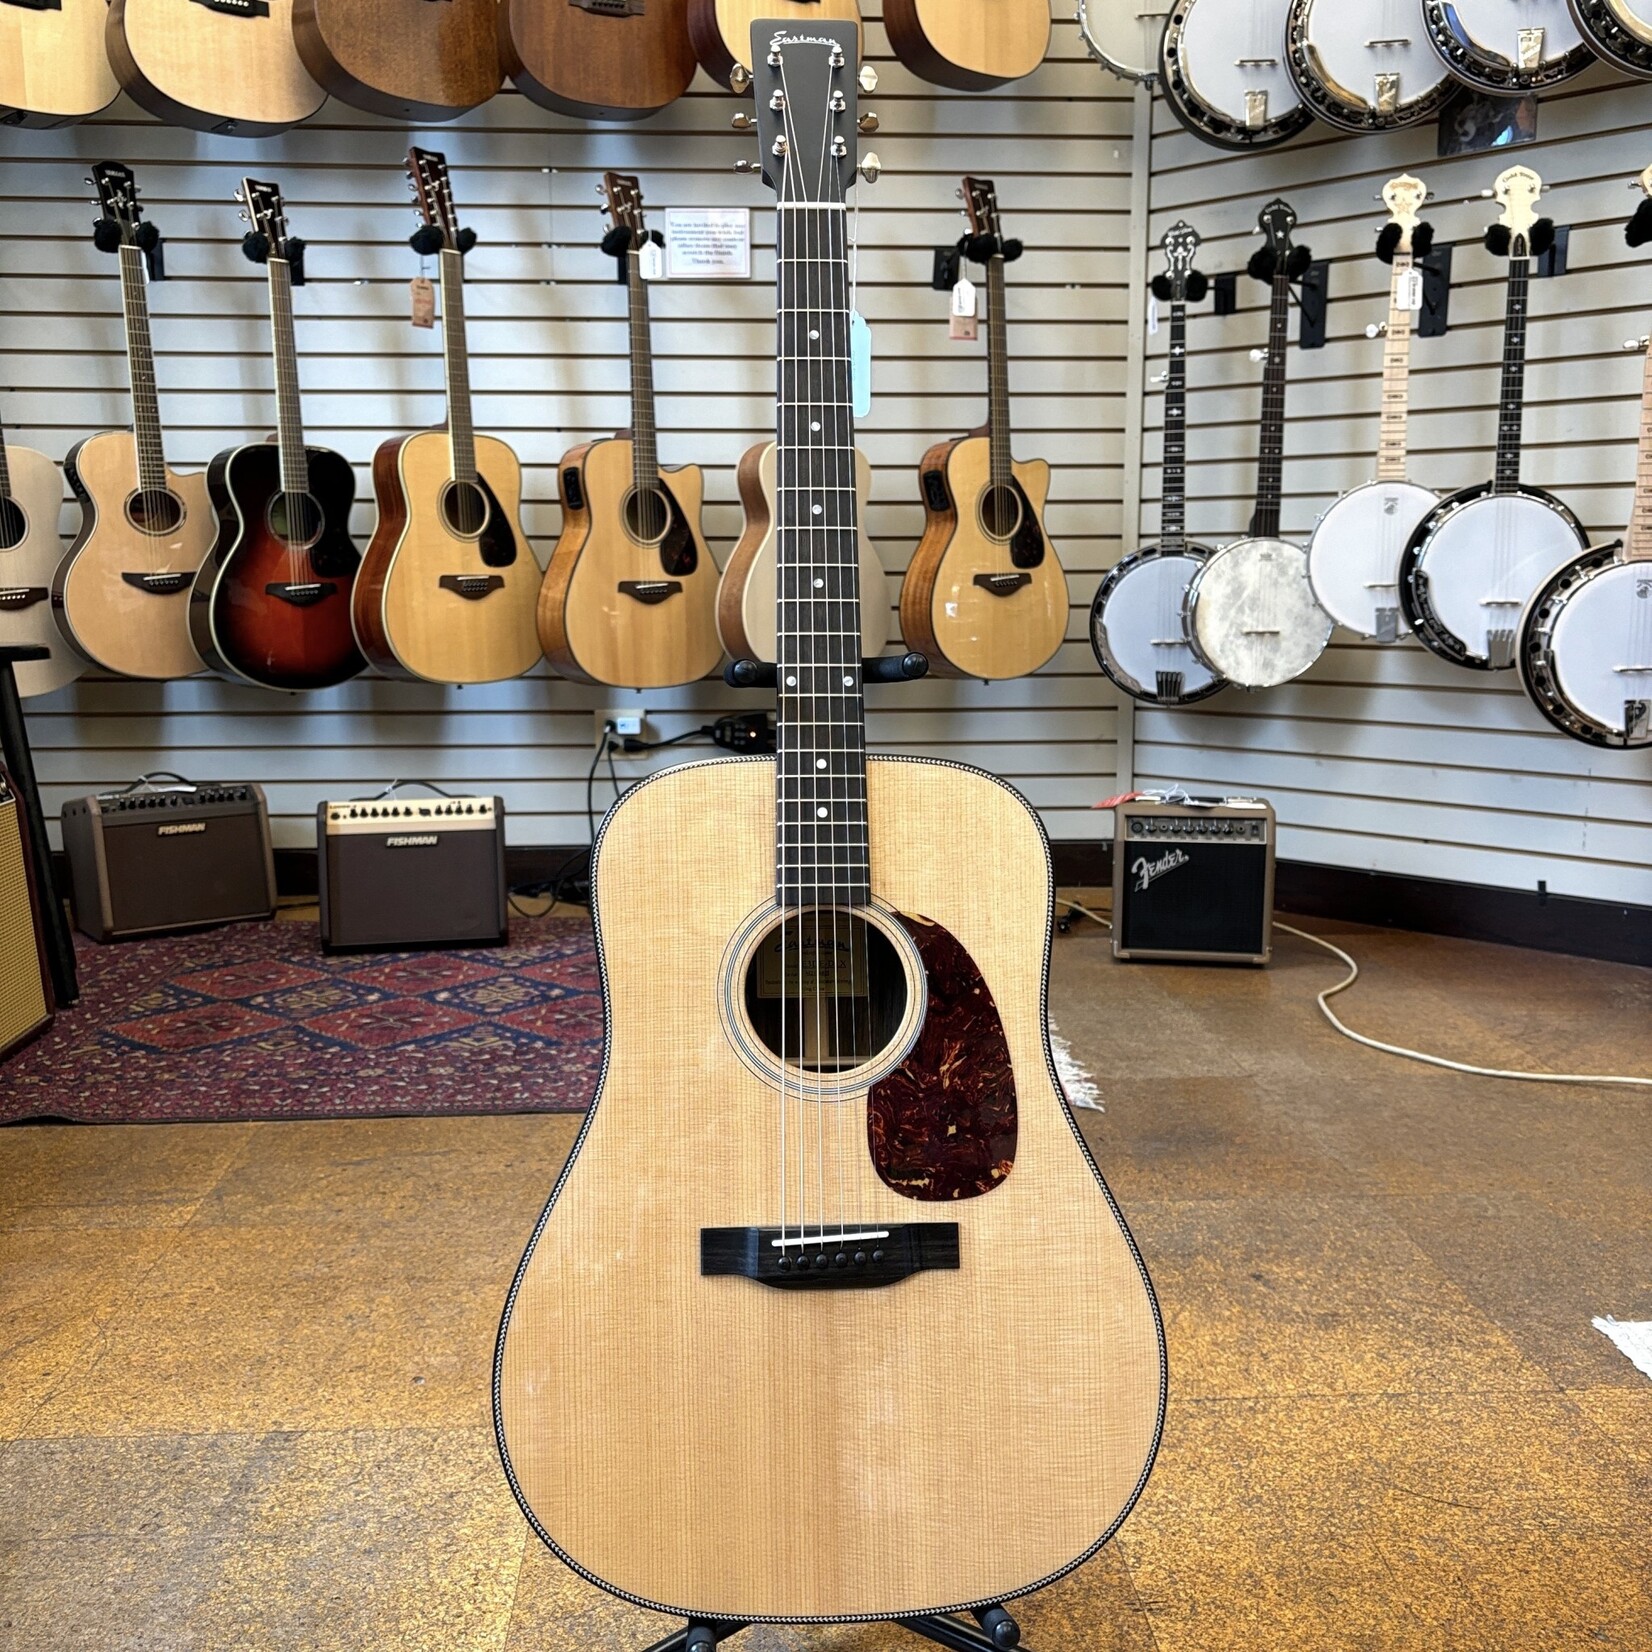 Eastman Eastman E3D Deluxe Sitka Spruce/Ovangkol Dreadnought Acoustic-Electric Guitar w/Padded Gig Bag